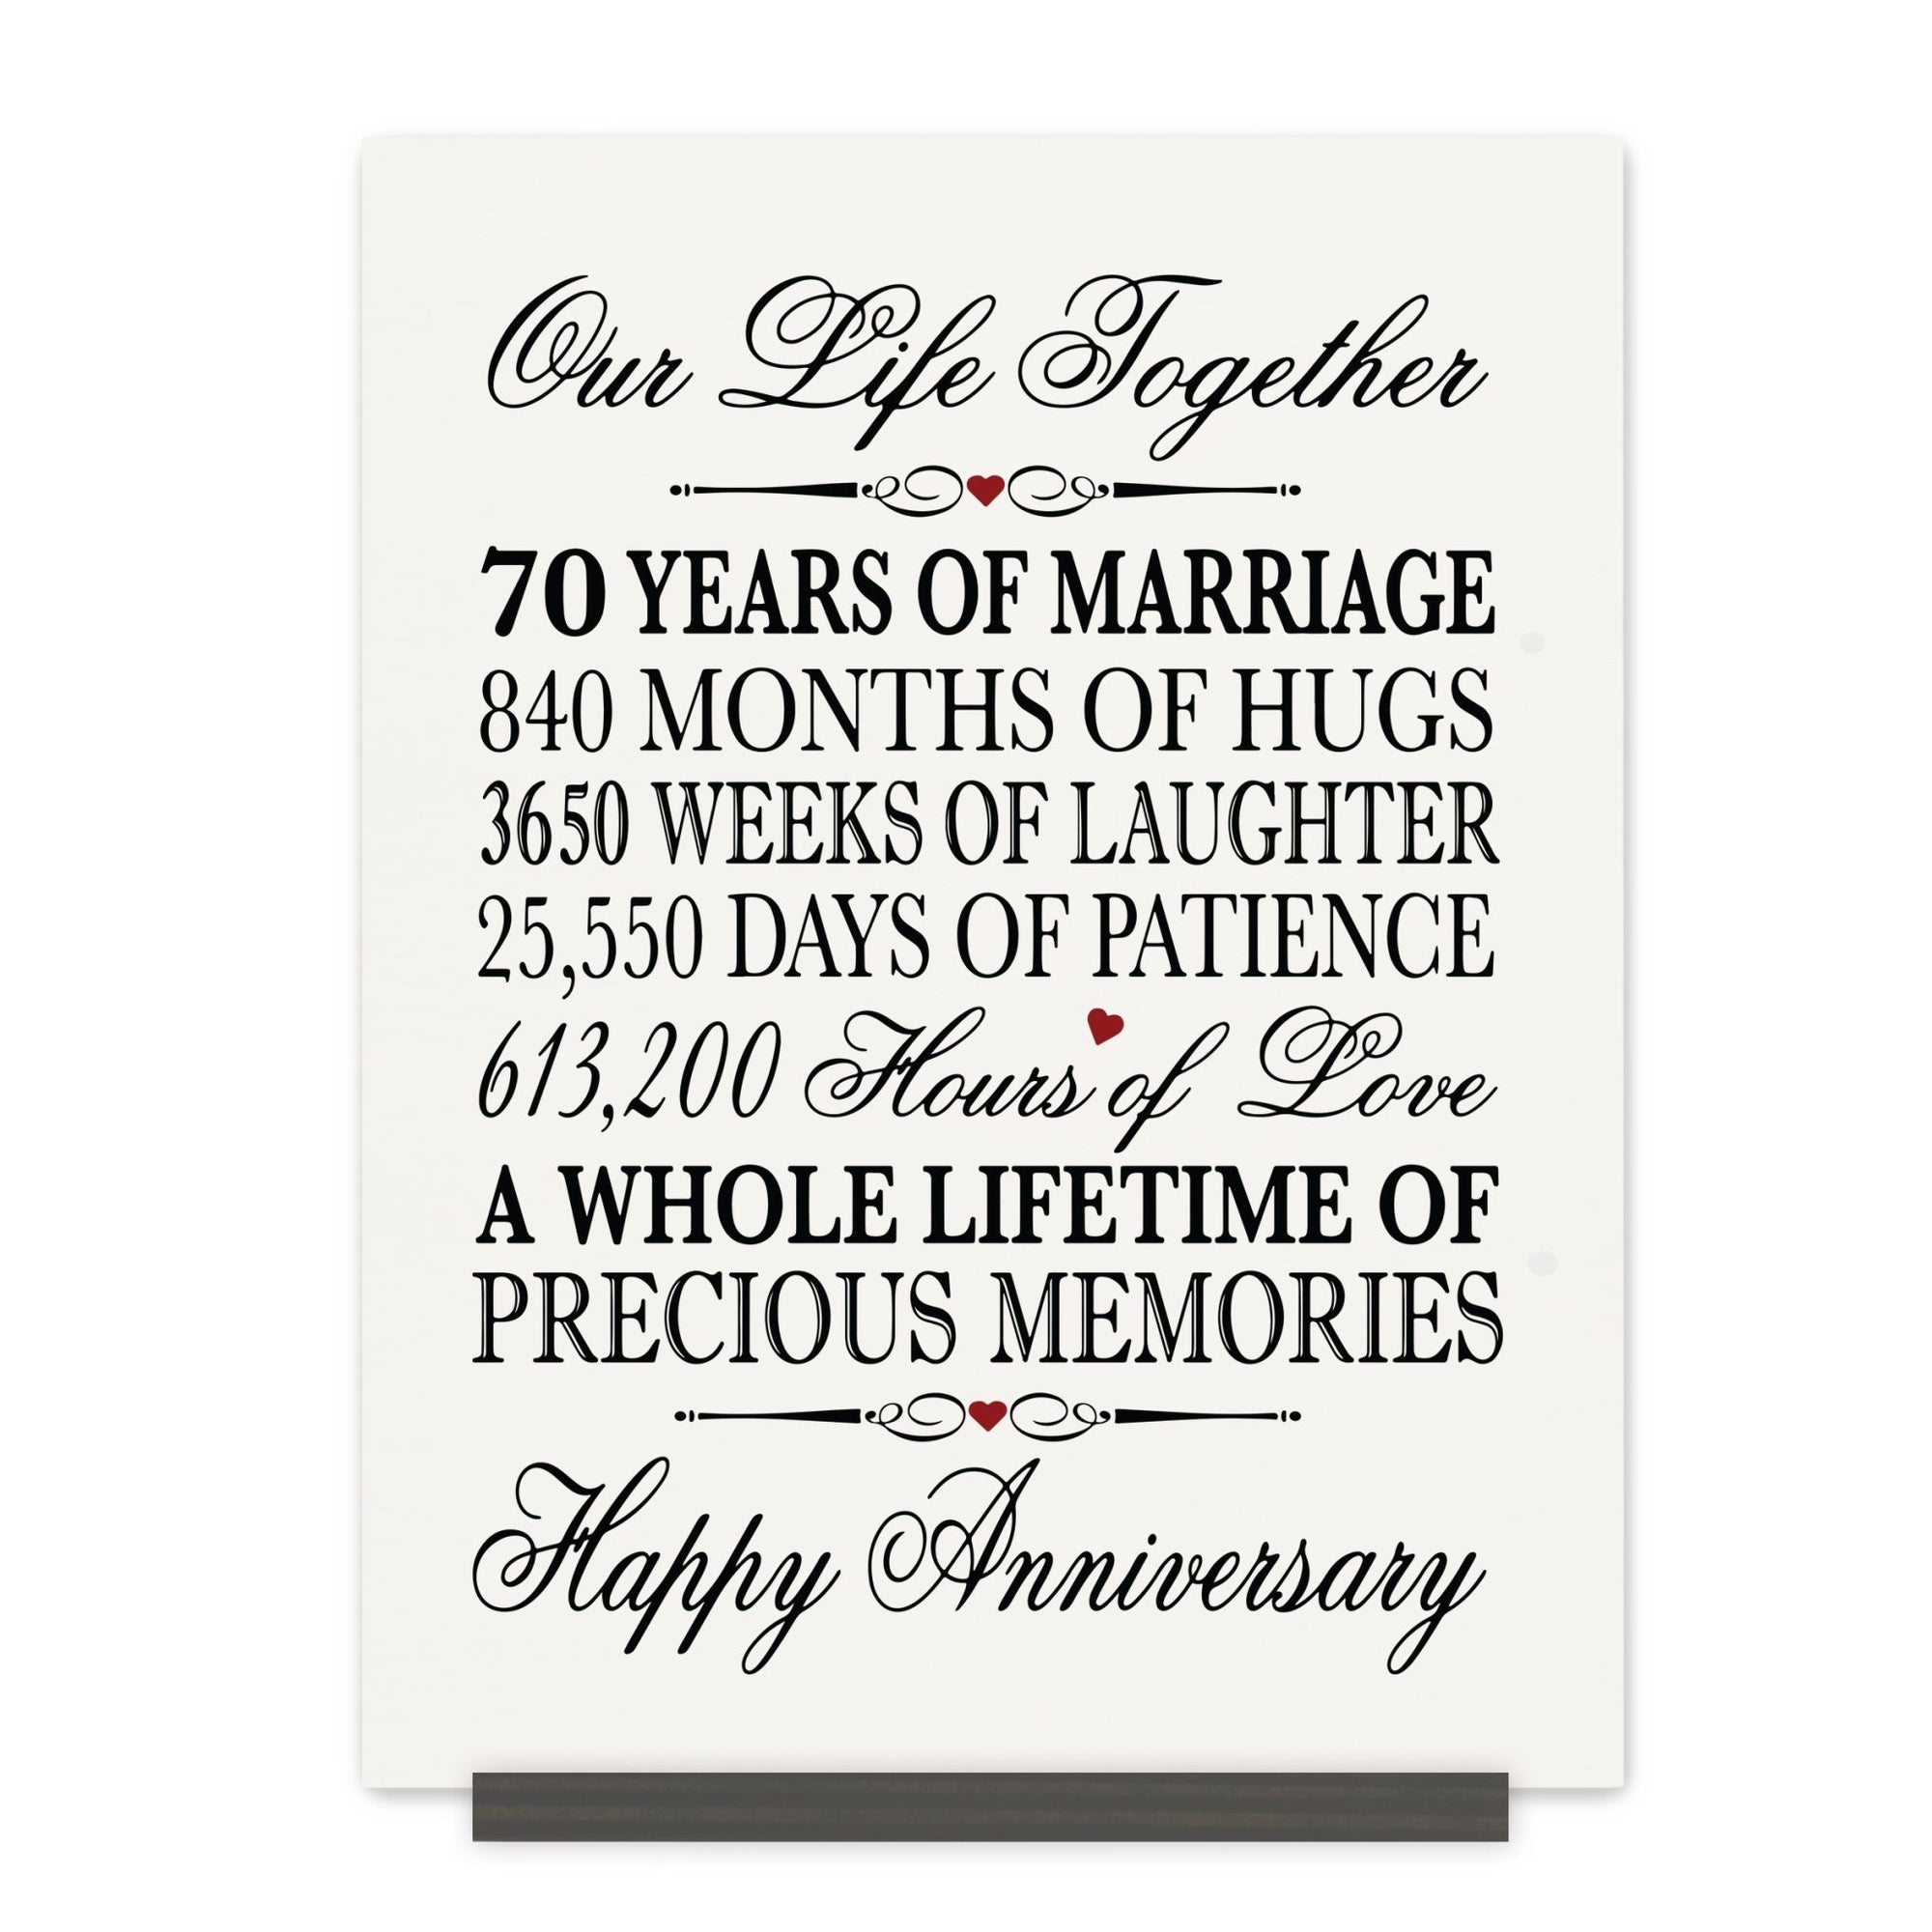 70th Wedding Anniversary Wall Plaque - Our Life Together - LifeSong Milestones